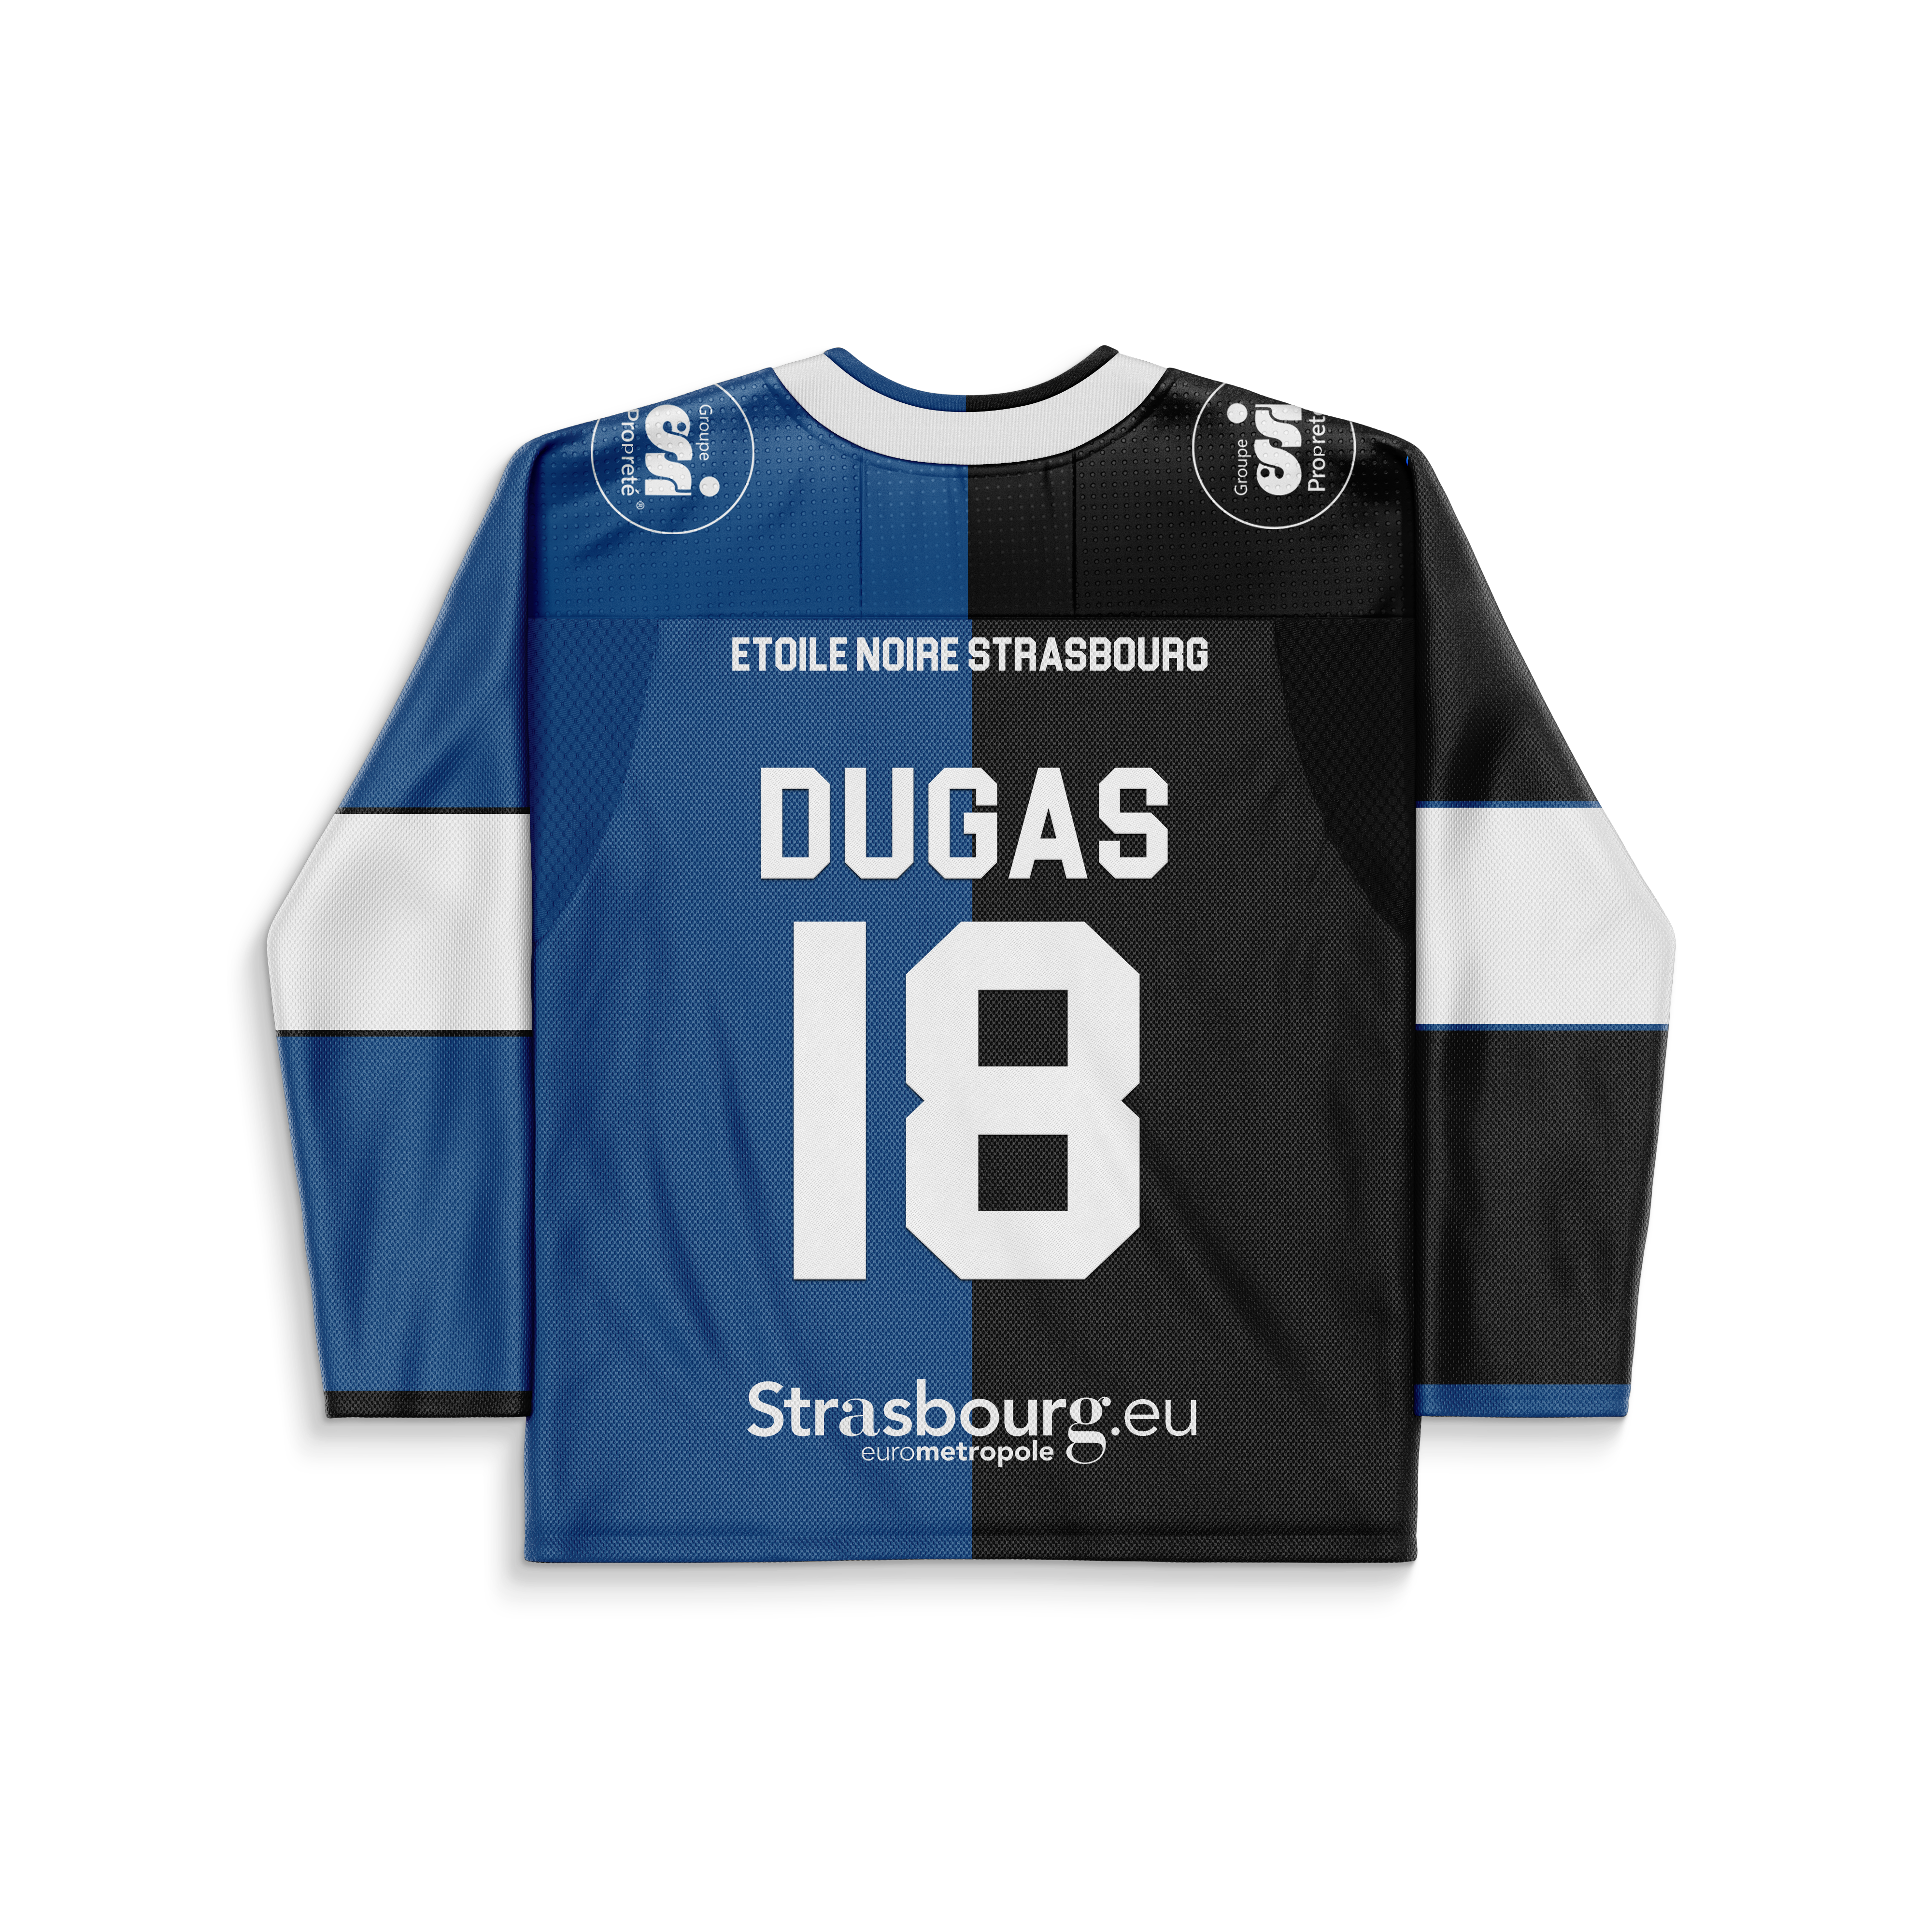 Maillot DUGAS #18